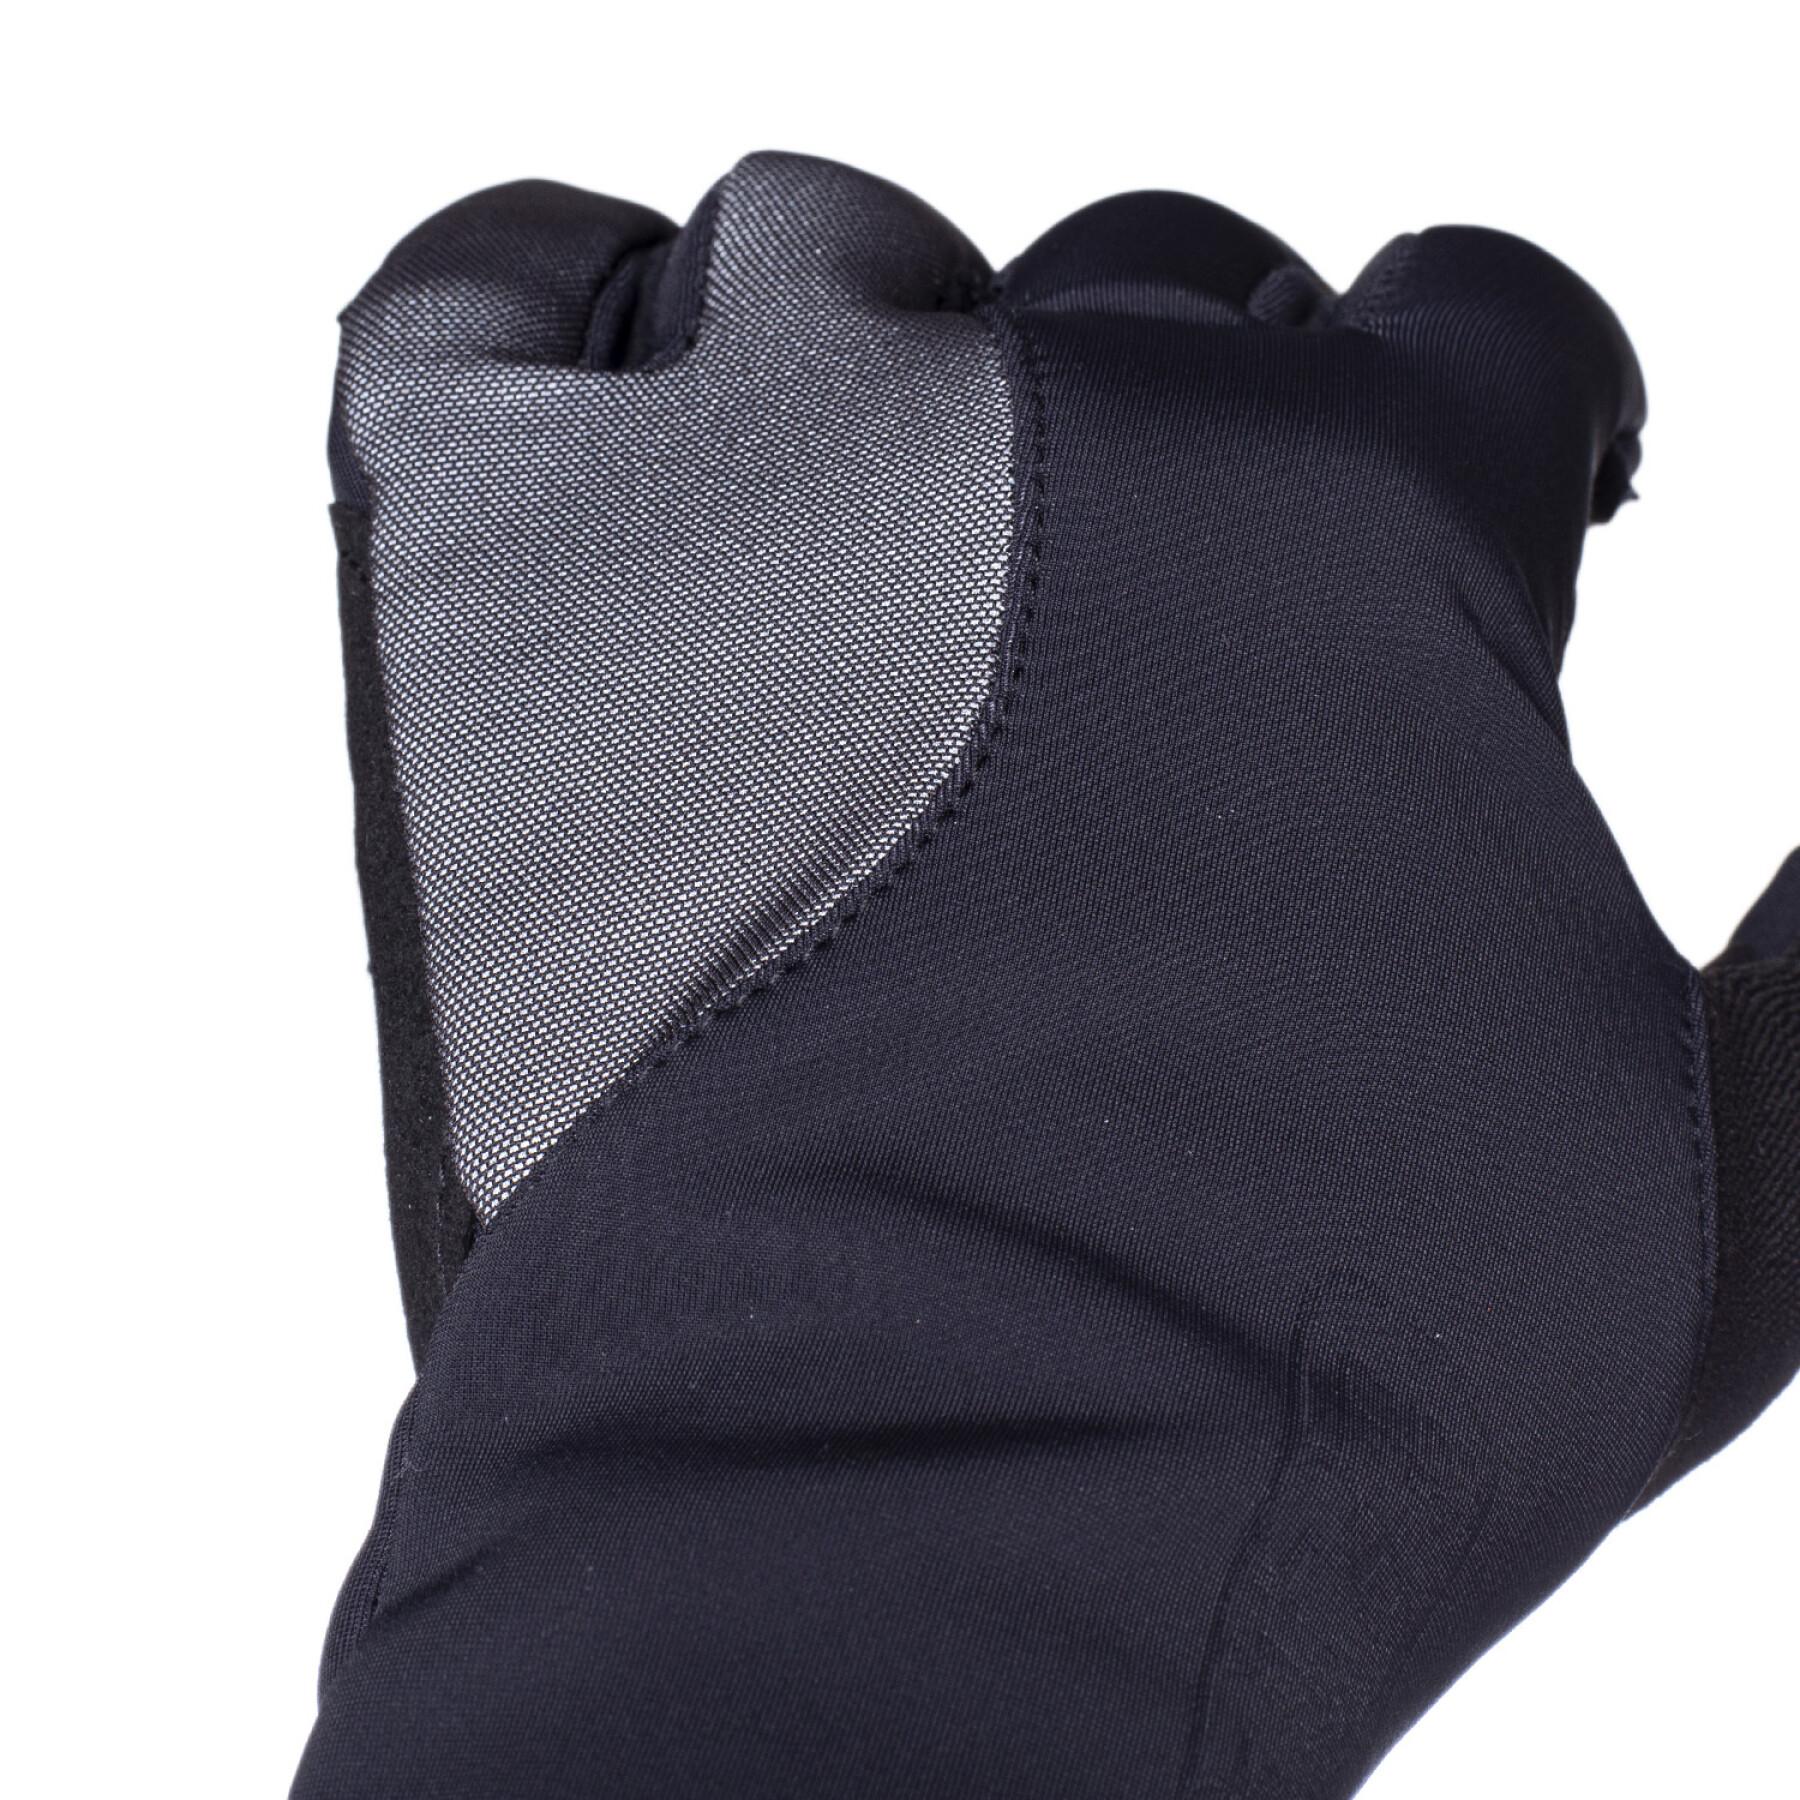 Mittens Bioracer One Tempest Protect